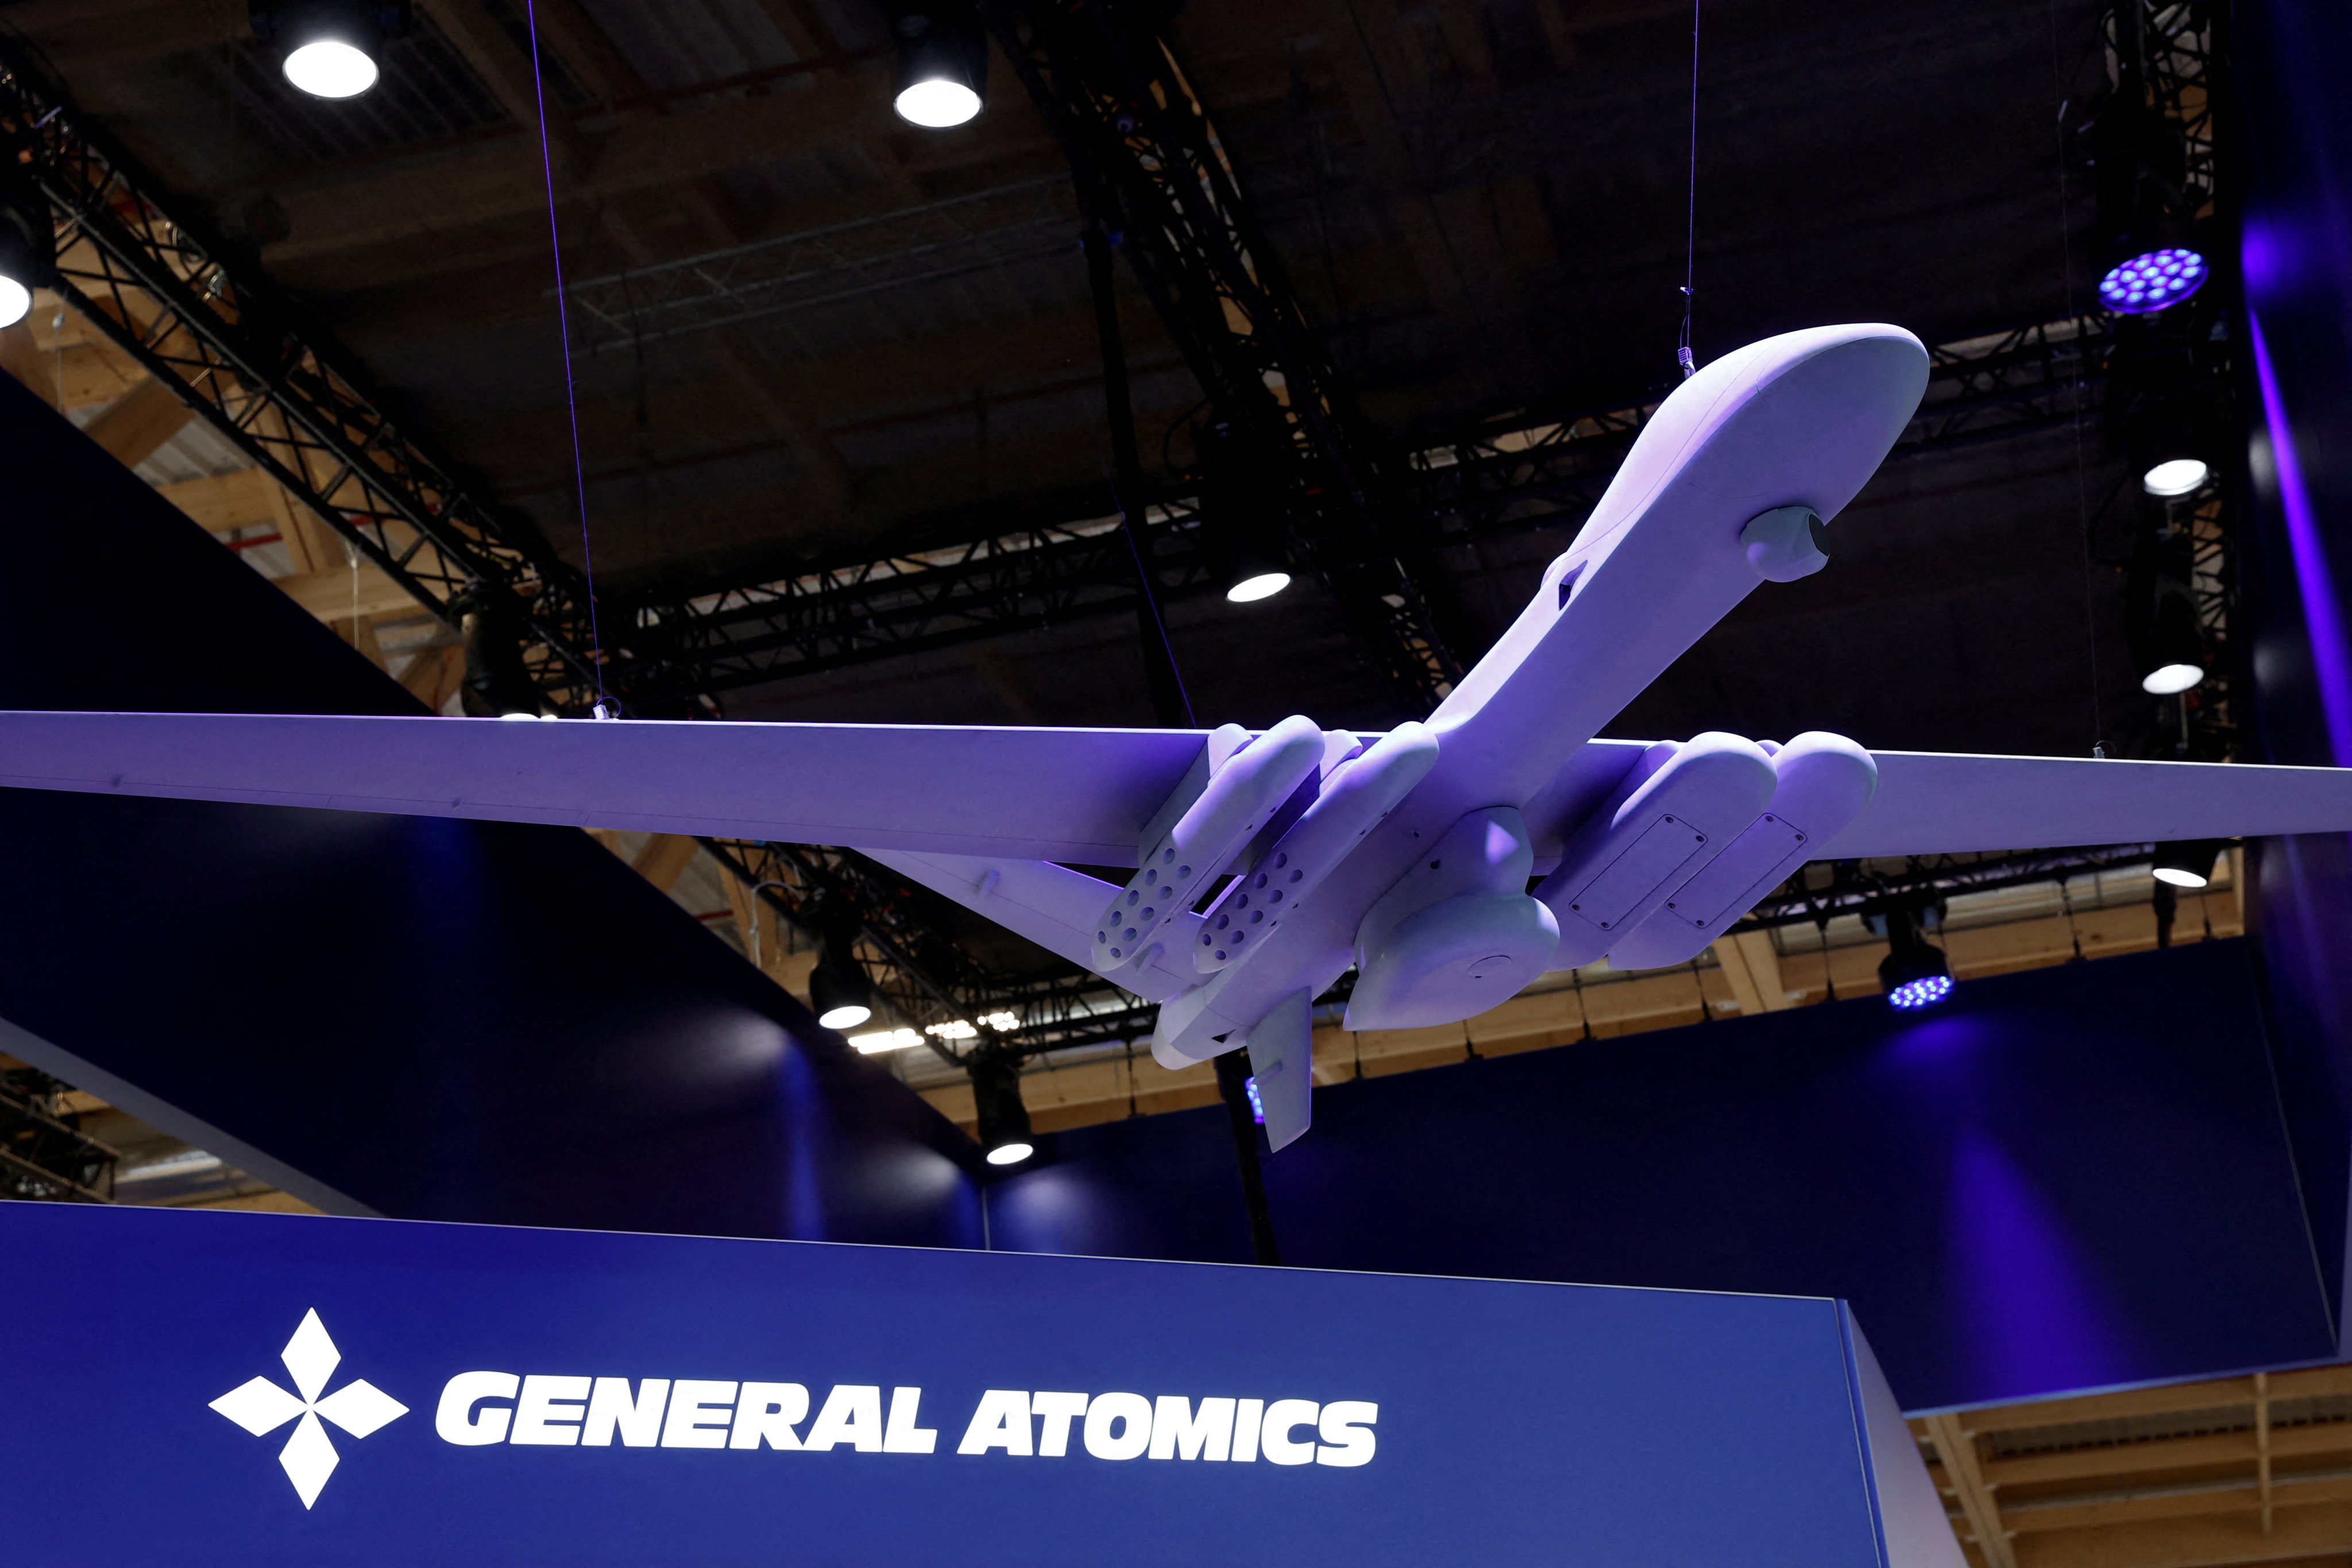 An MQ-9B drone manufactured by General Atomics is displayed at the 54th International Paris Airshow in France in June 2023. Photo: Reuters